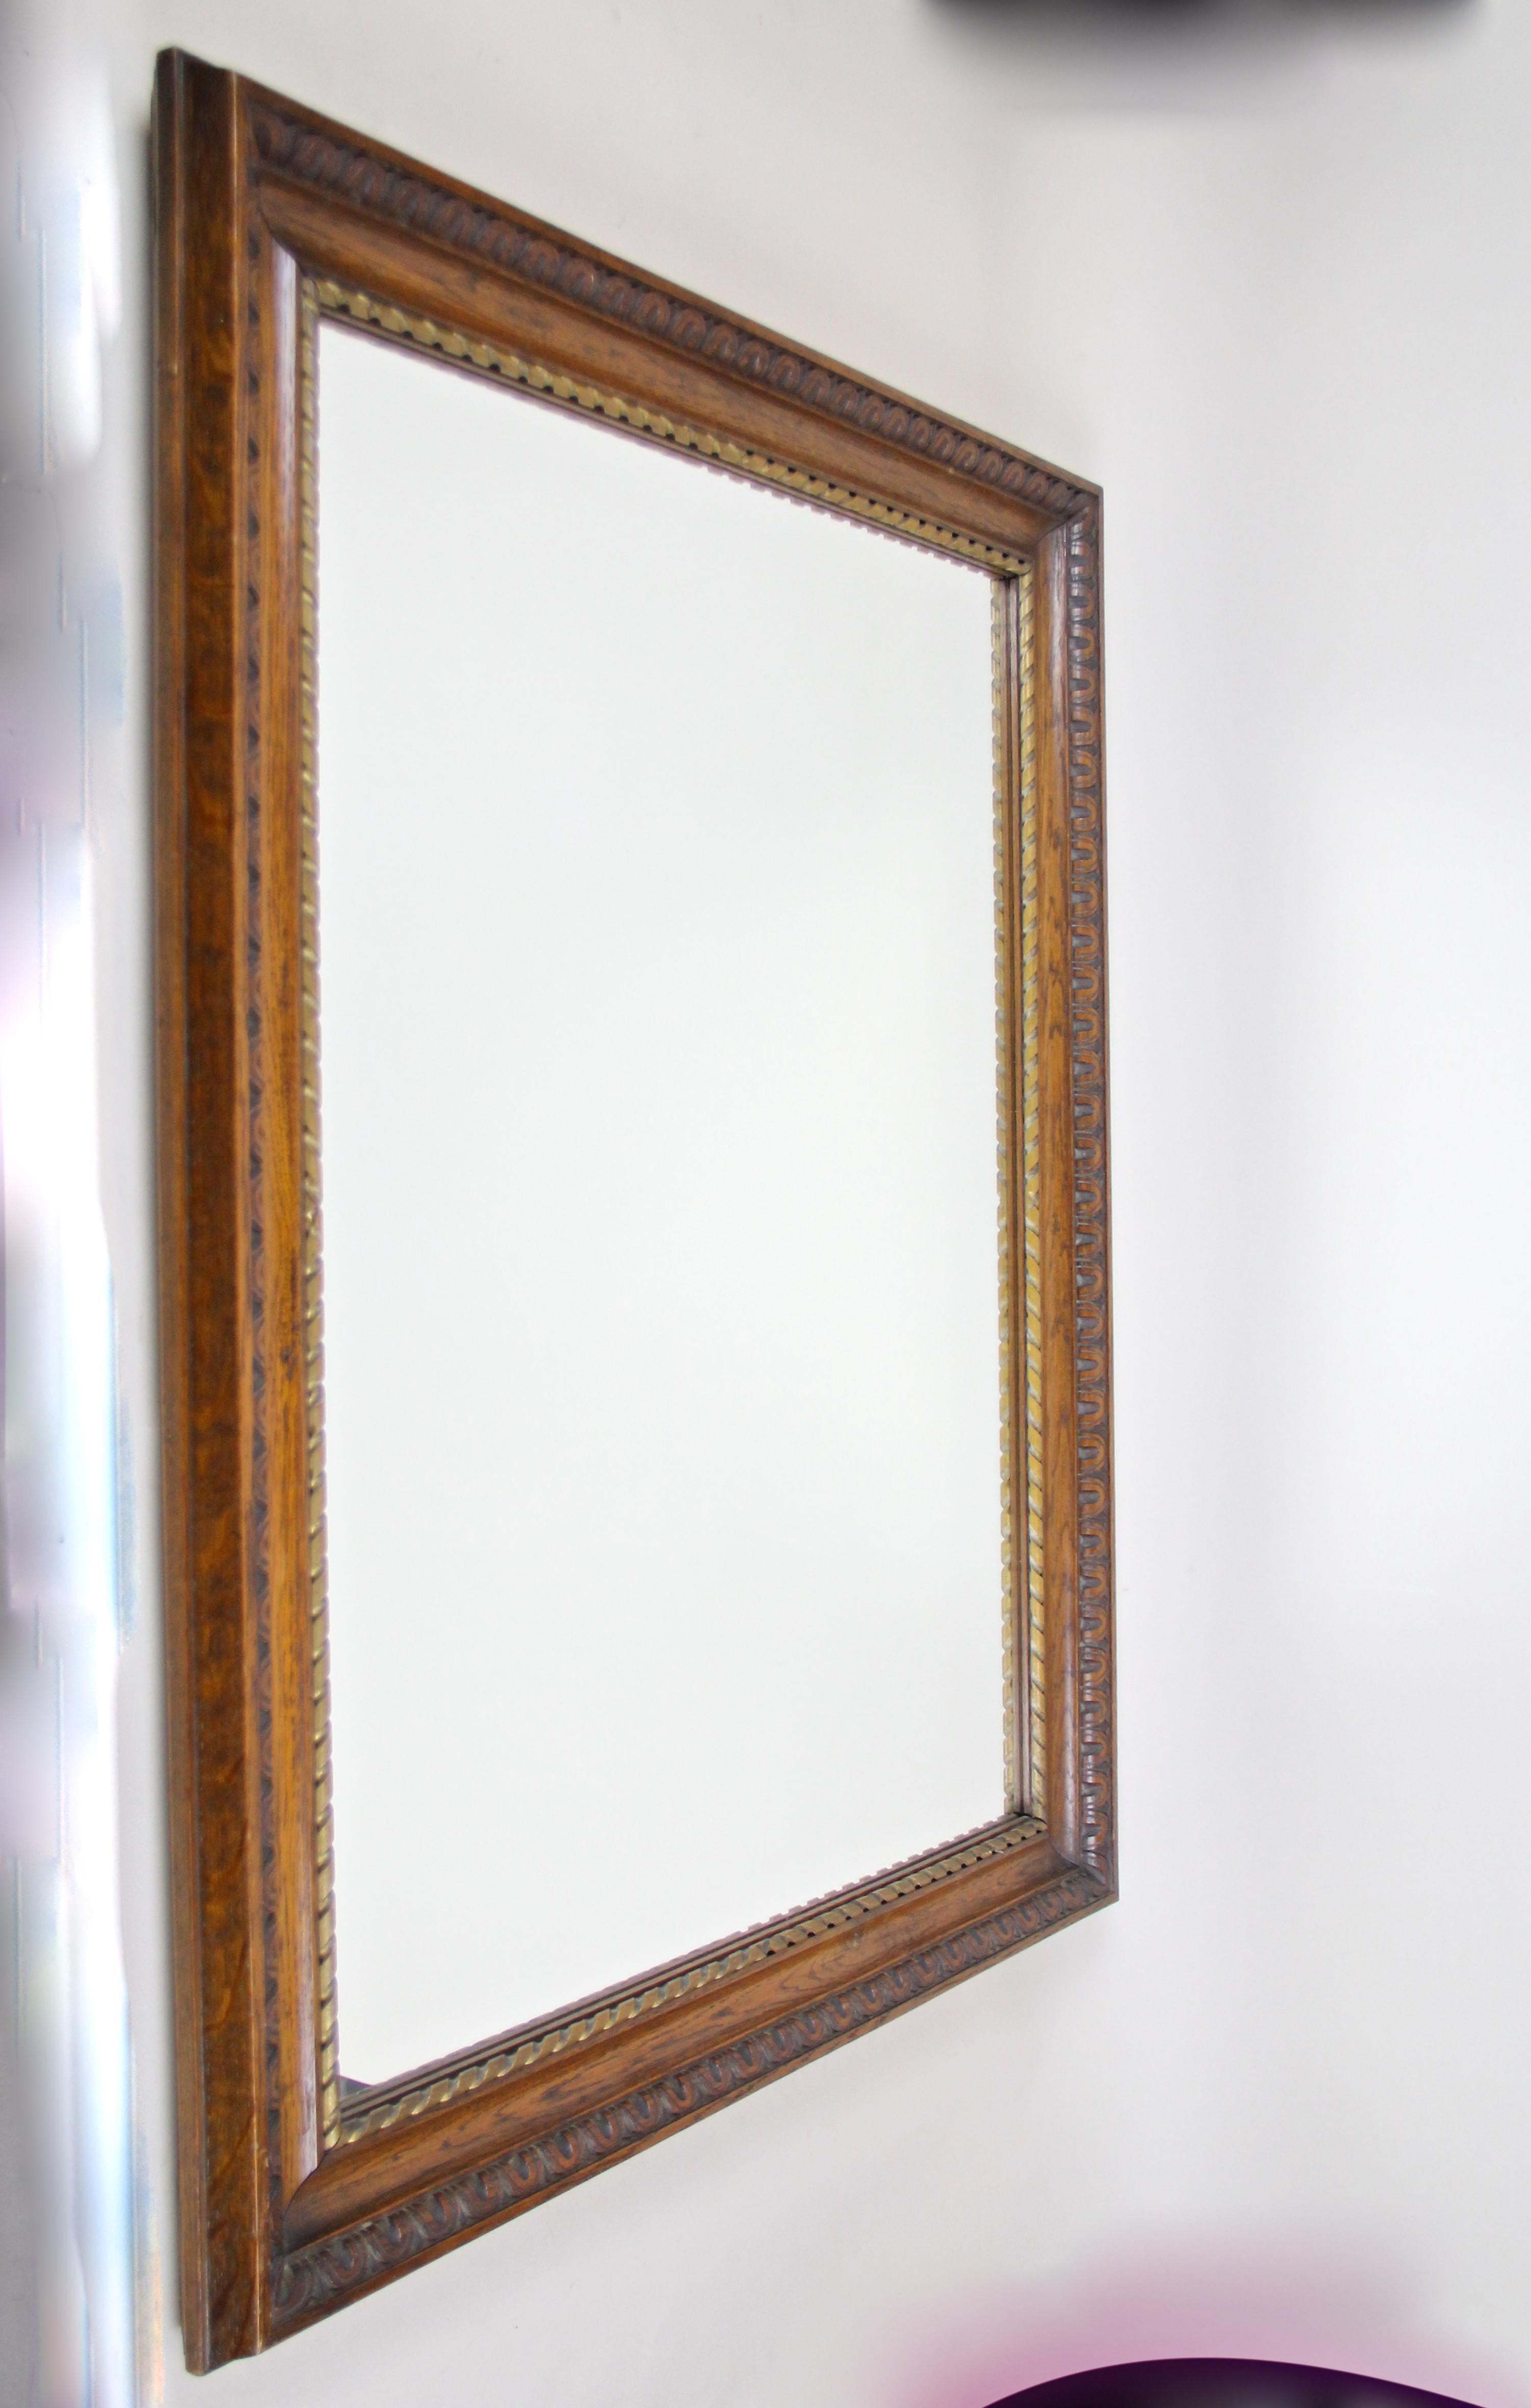 Fantastic oakwood wall mirror from the so-called 